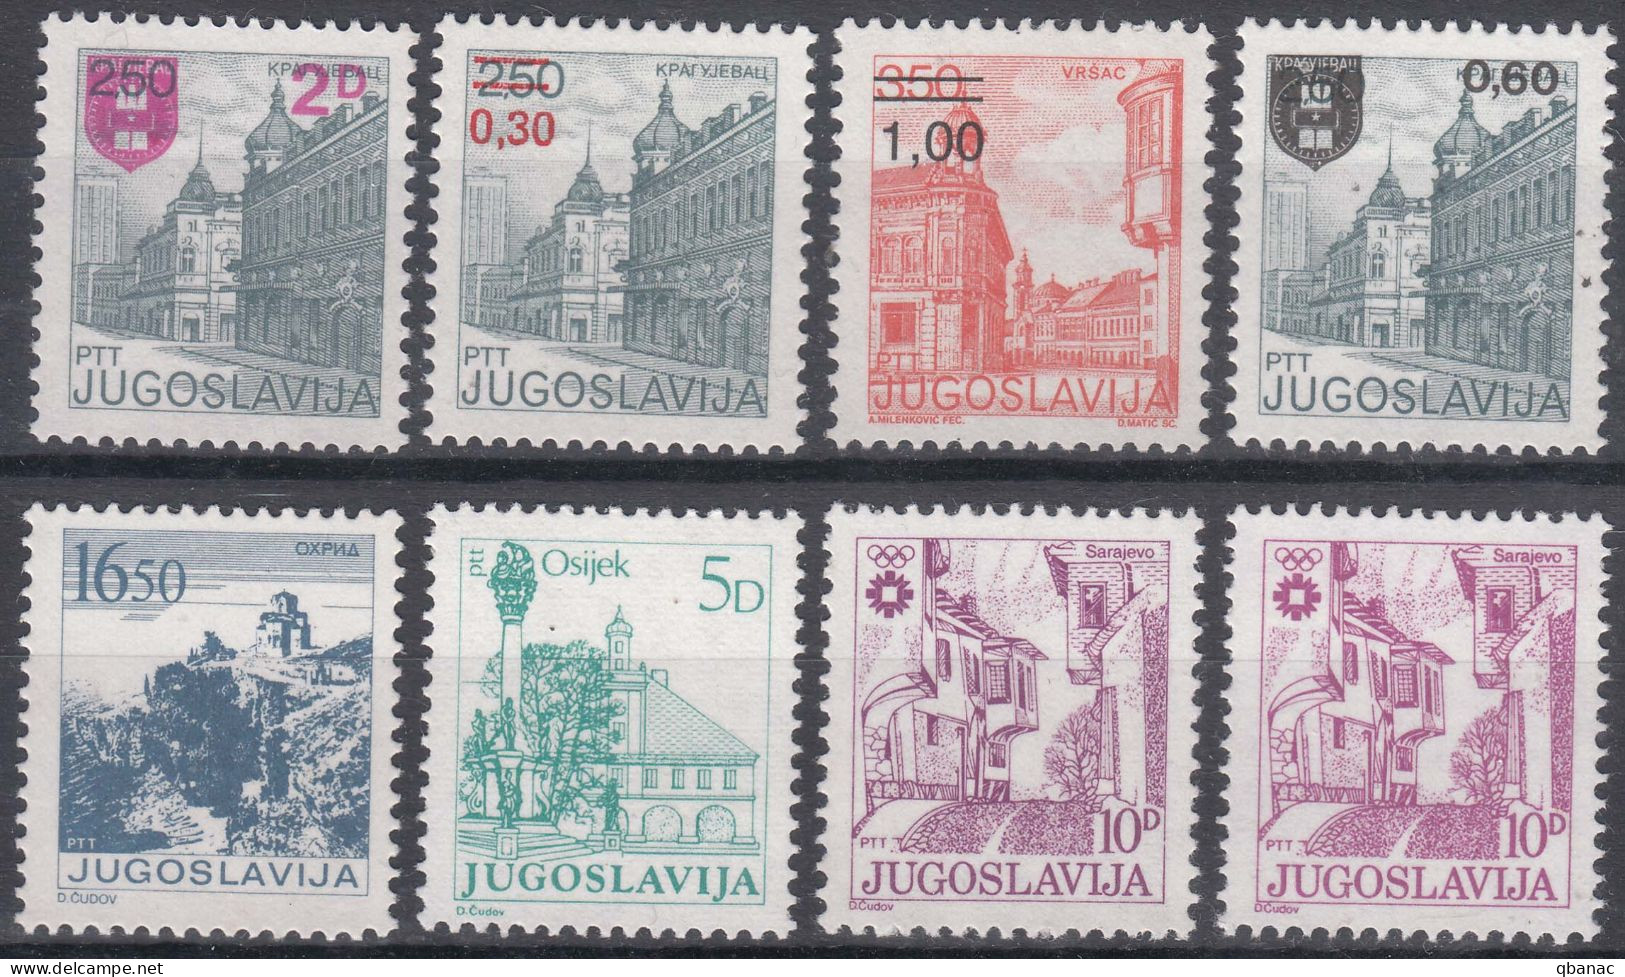 Yugoslavia Republic 1983 Definitive Stamps, Mint Never Hinged - Unused Stamps